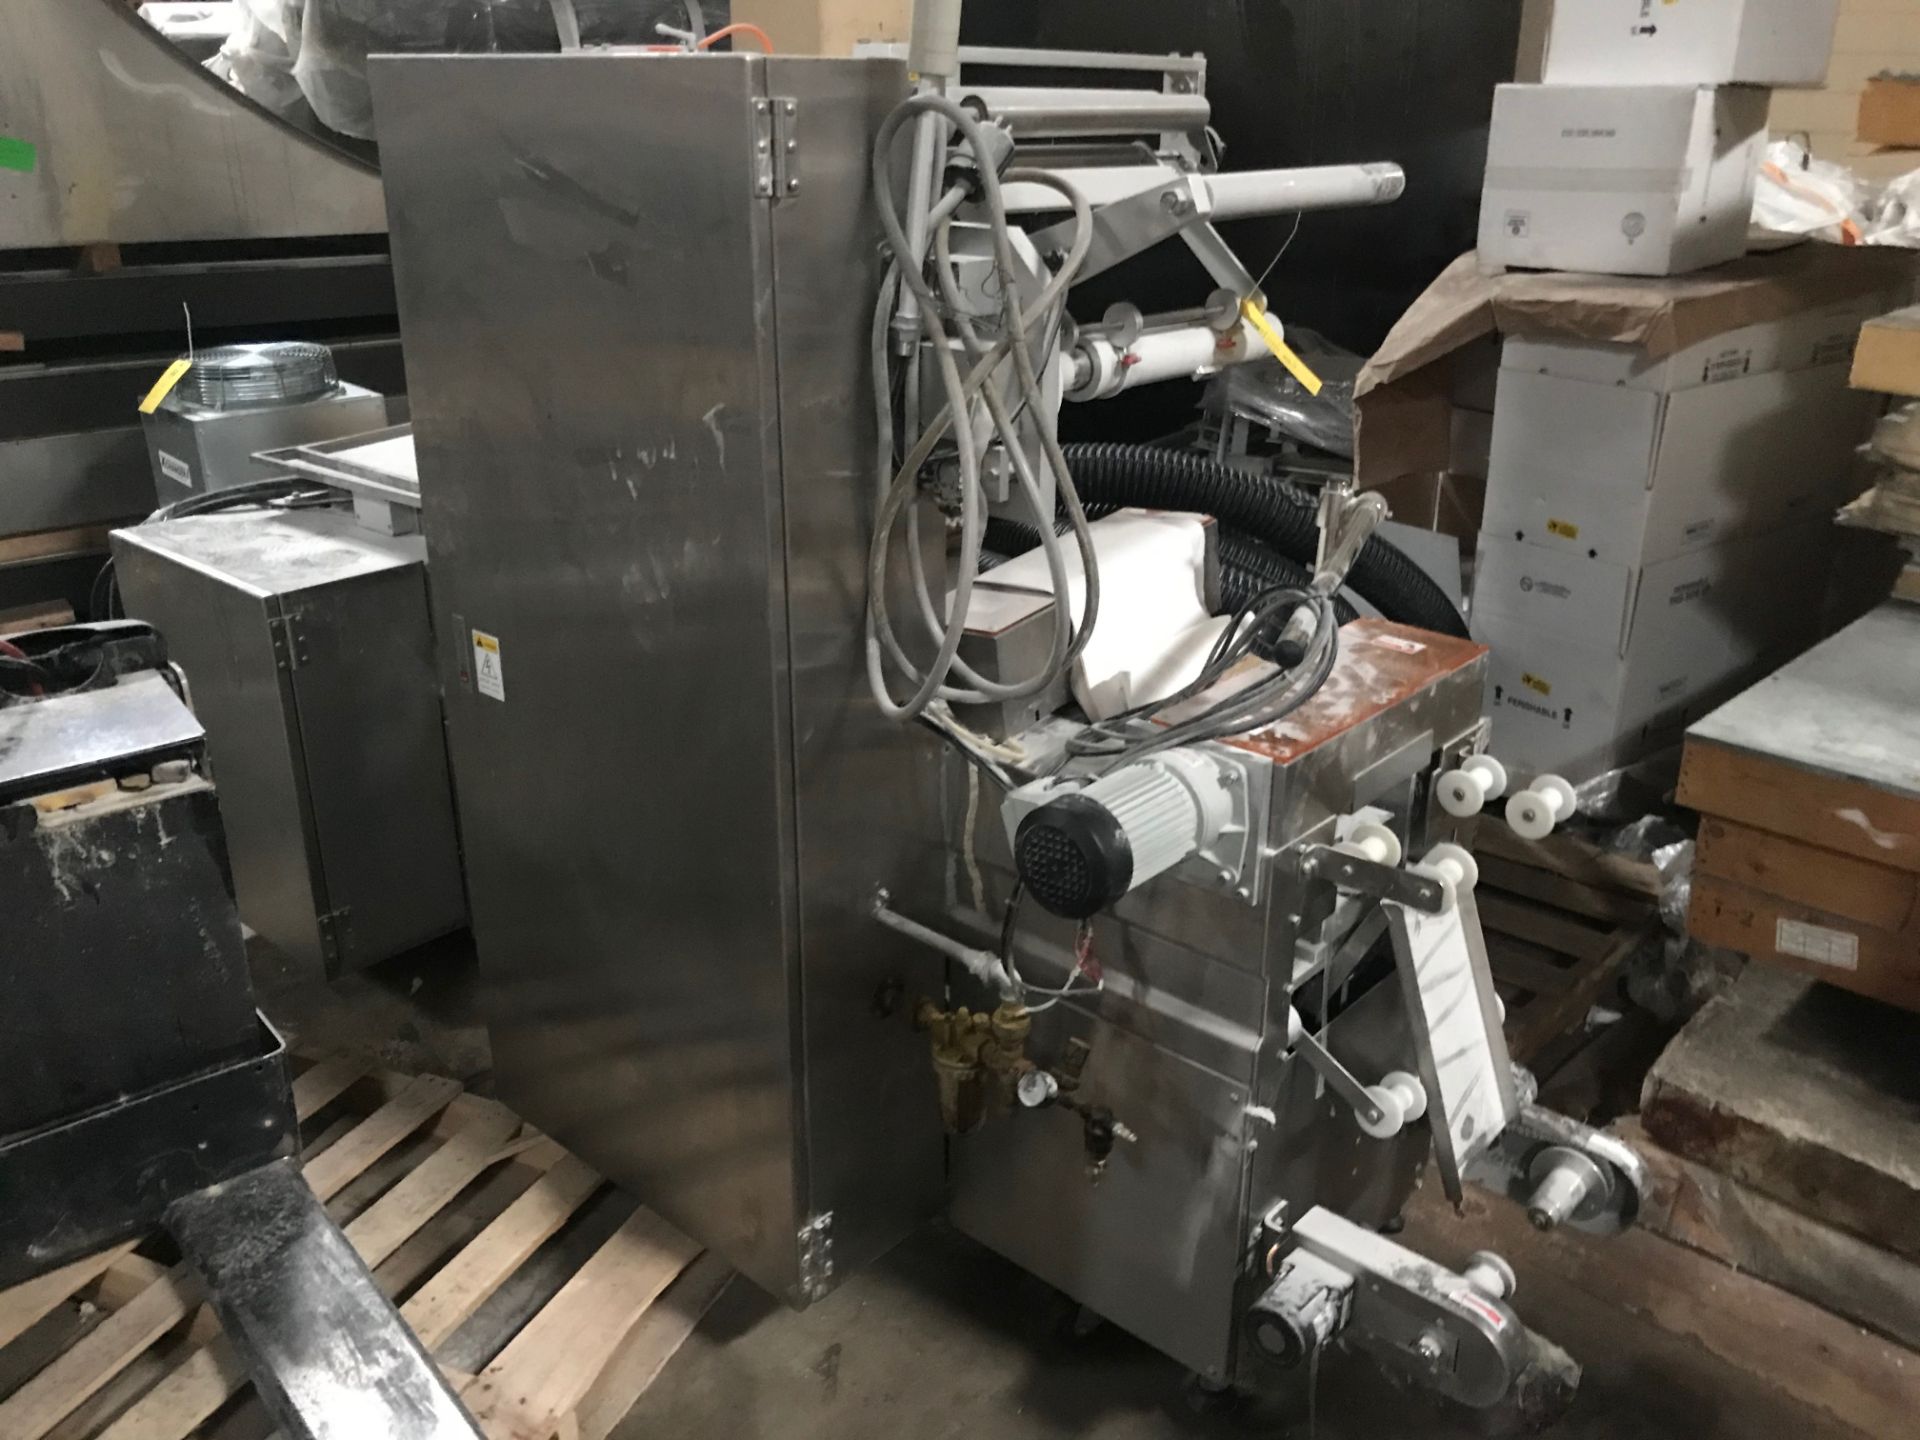 Chei Mei Automatic Packaging Machine, Serial# 14951, 220 Volts, 60 Hz